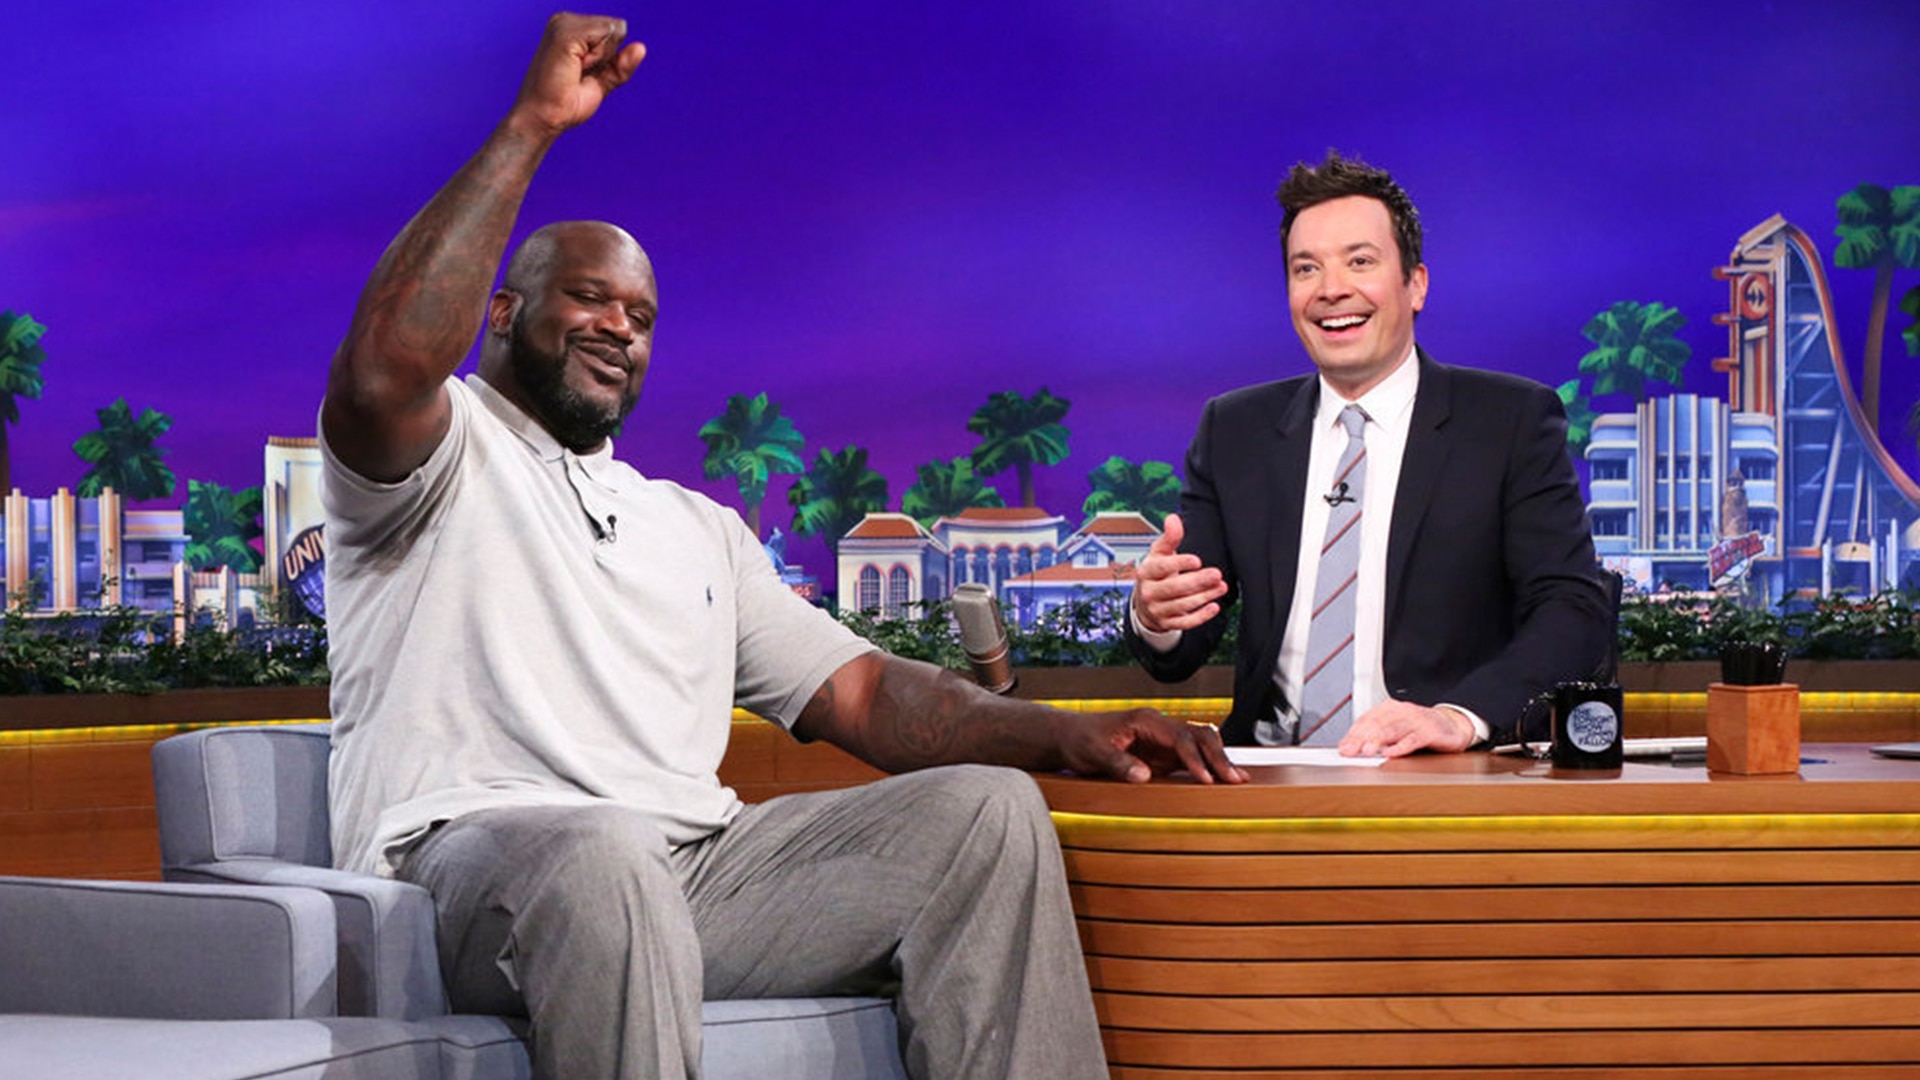 Watch The Tonight Show Starring Jimmy Fallon Interview Shaquille O